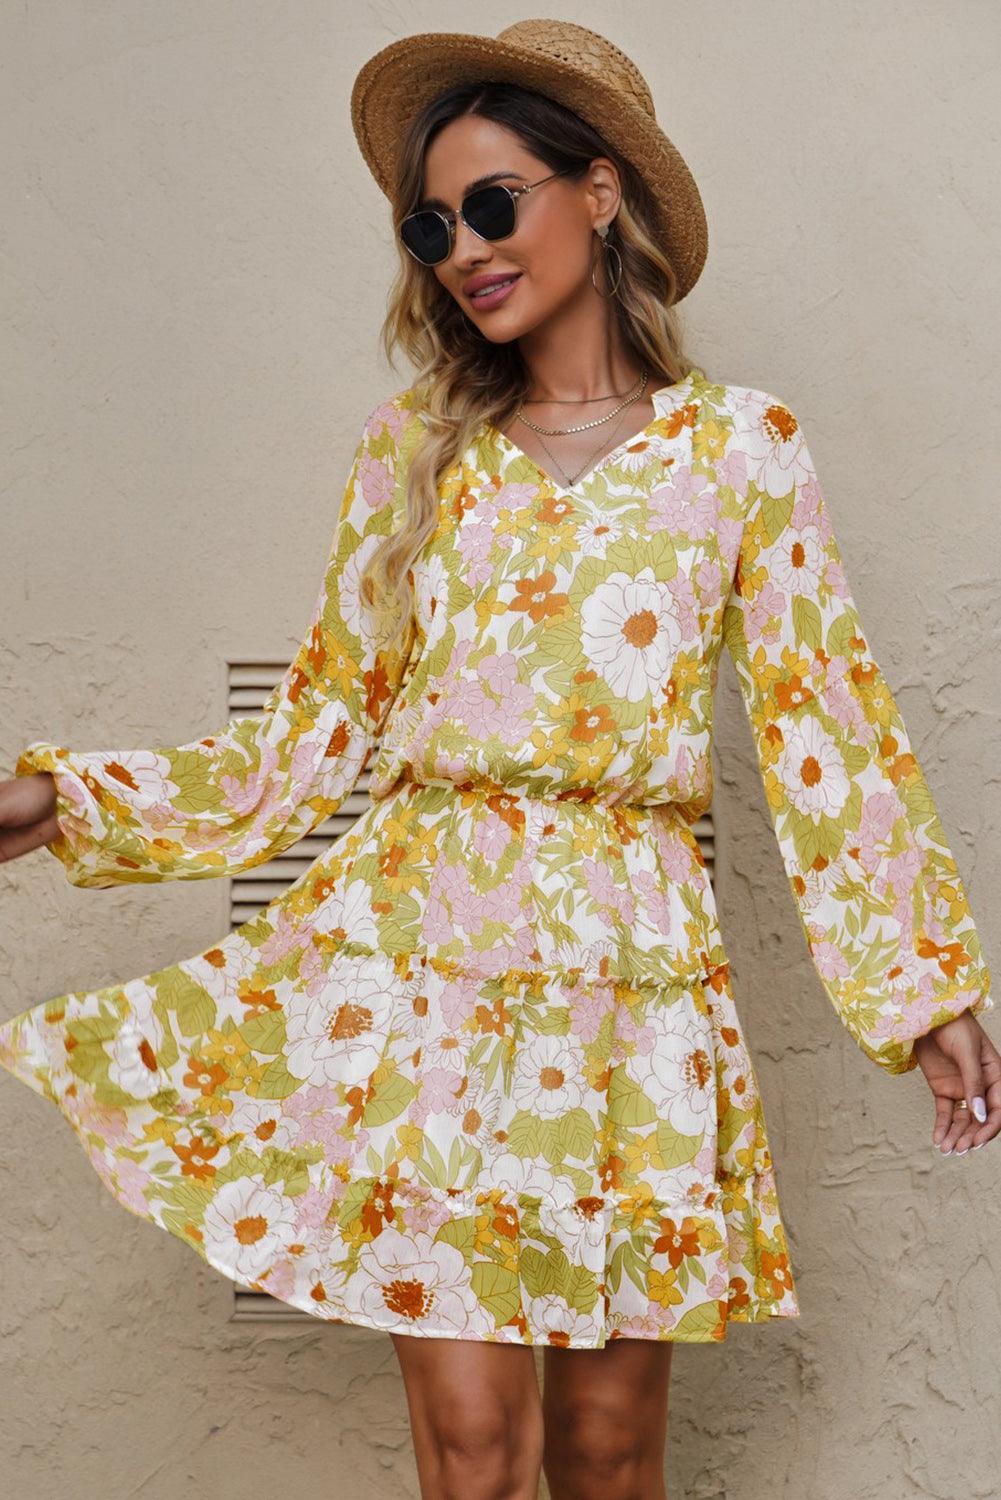 Women's Dresses Floral Frill Trim Puff Sleeve Notched Neck Dress